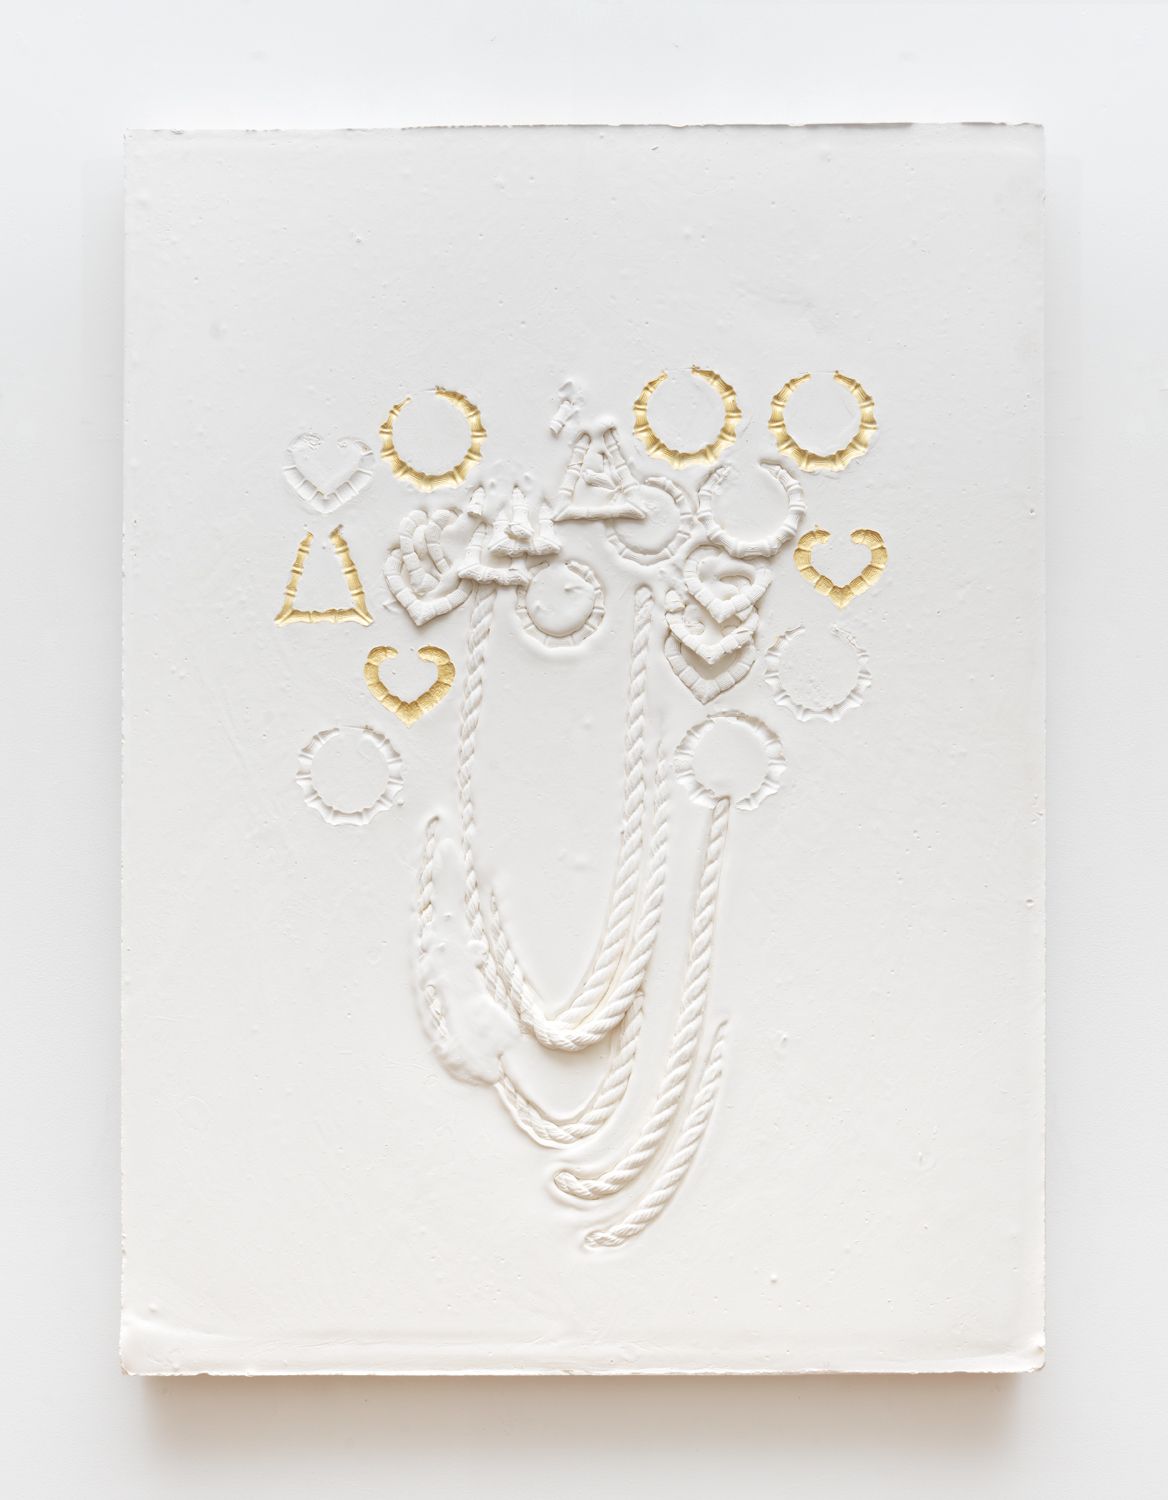 LaKela Brown, Composition with chains, round earrings, heart earrings and bamboo earrings, 2019, plaster, foam, and acrylic, 46 x 34 x 3 in. (116.84 x 86.36 x 7.62 cm)